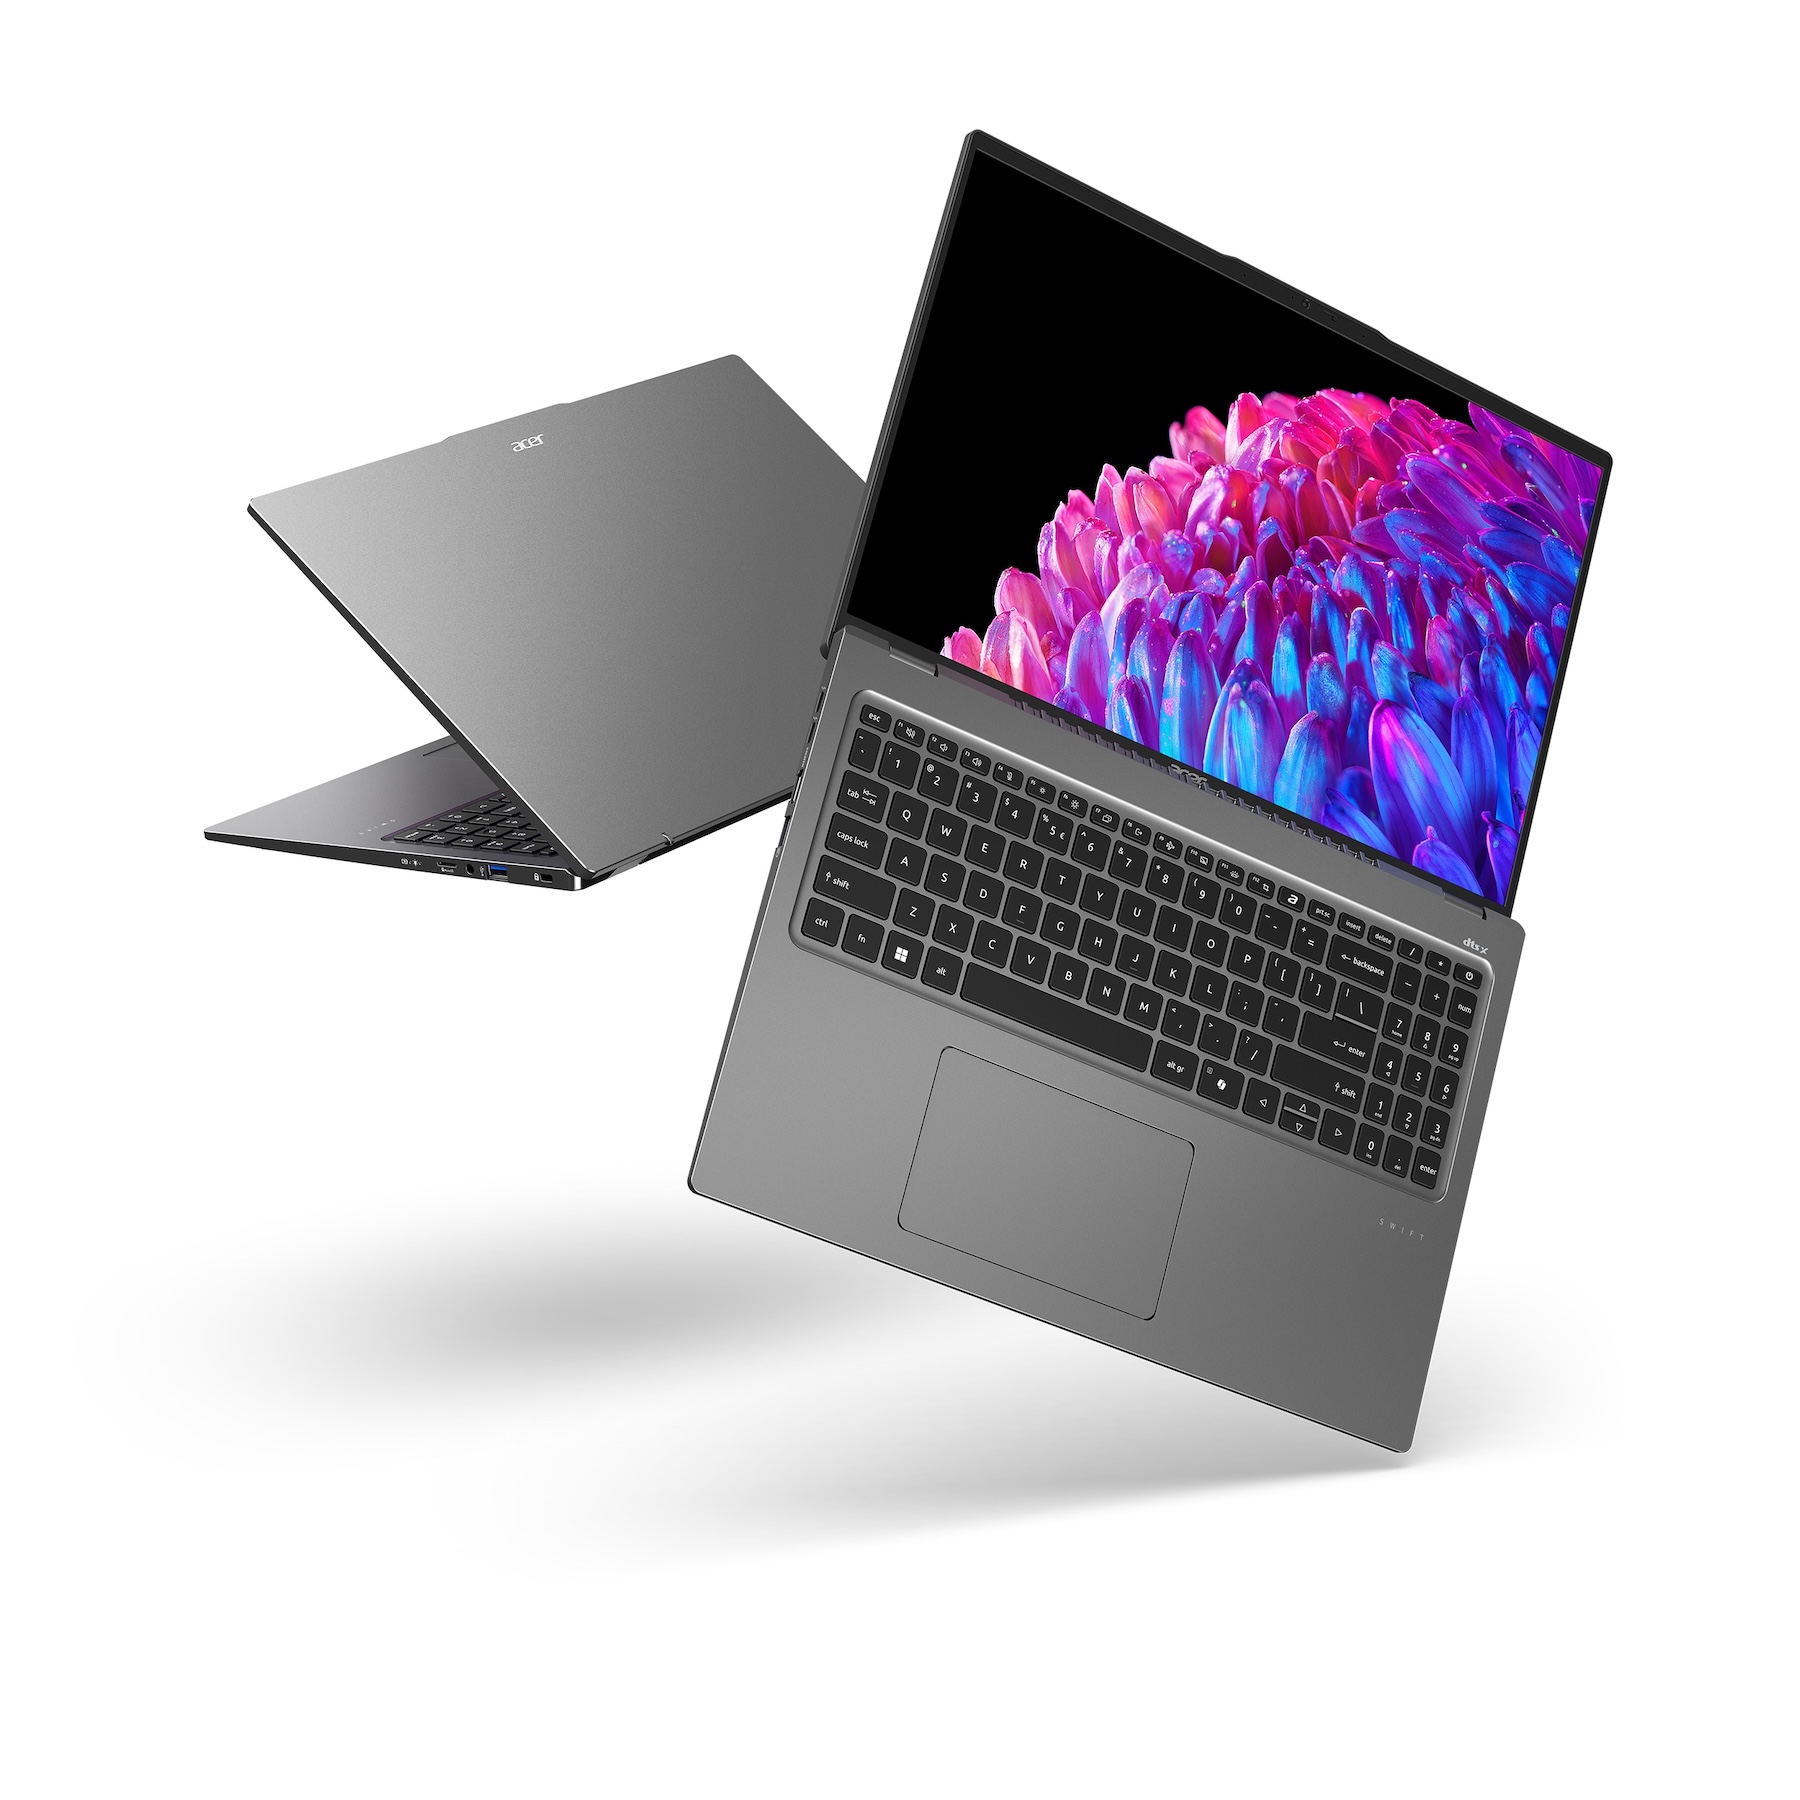 Discover Acer's new Swift Go AI laptops powered by Intel Core Ultra processors